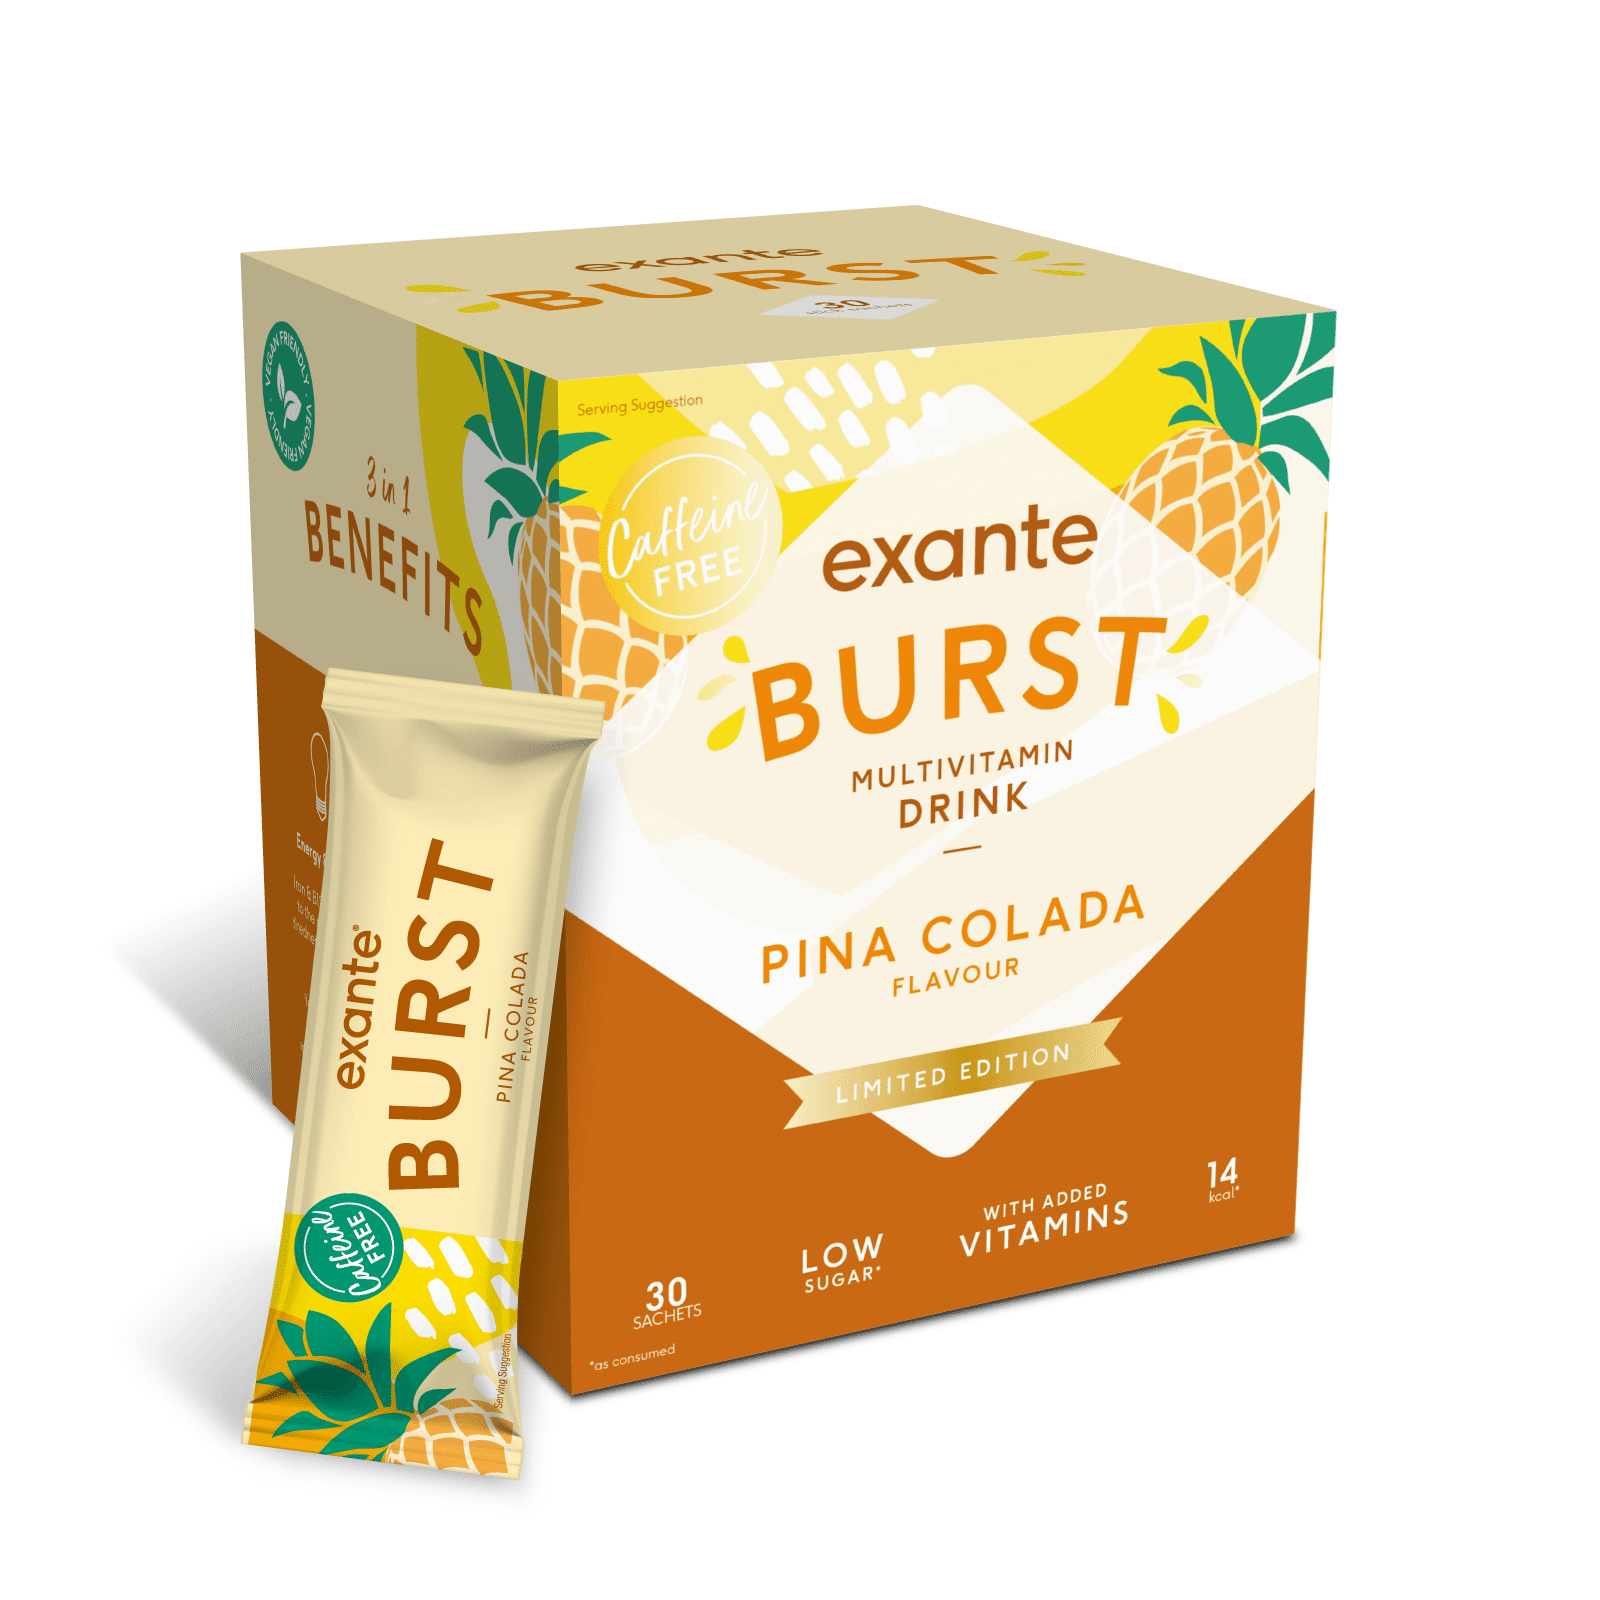 Exante Diet Limited Edition Pina Colada BURST Box of 30